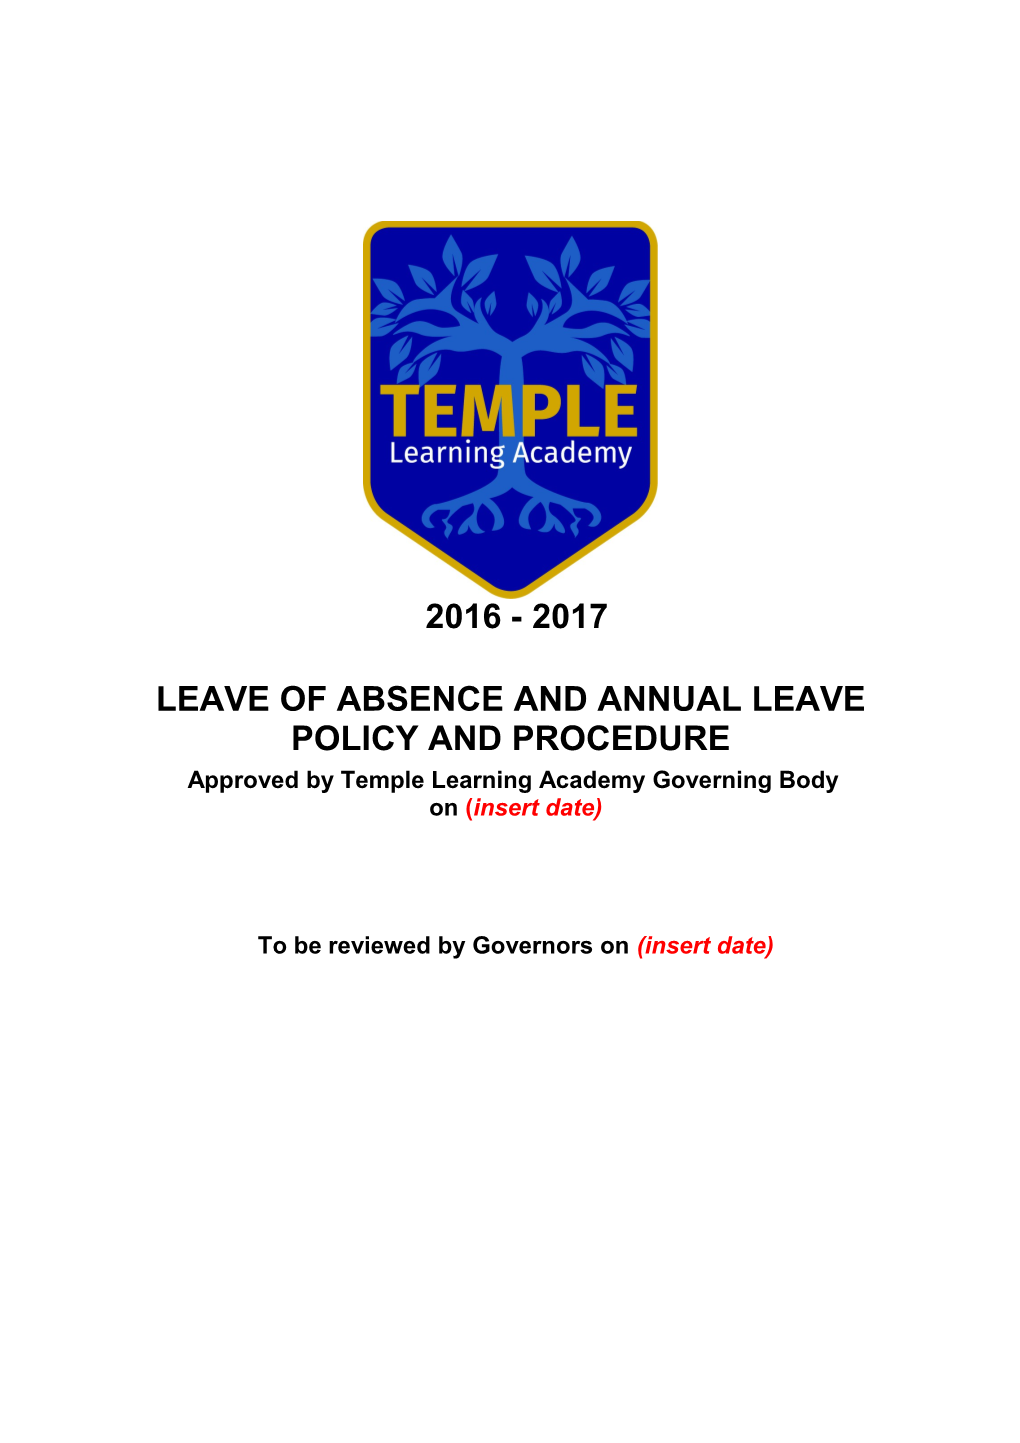 Leave of Absence and Annual Leave Policy